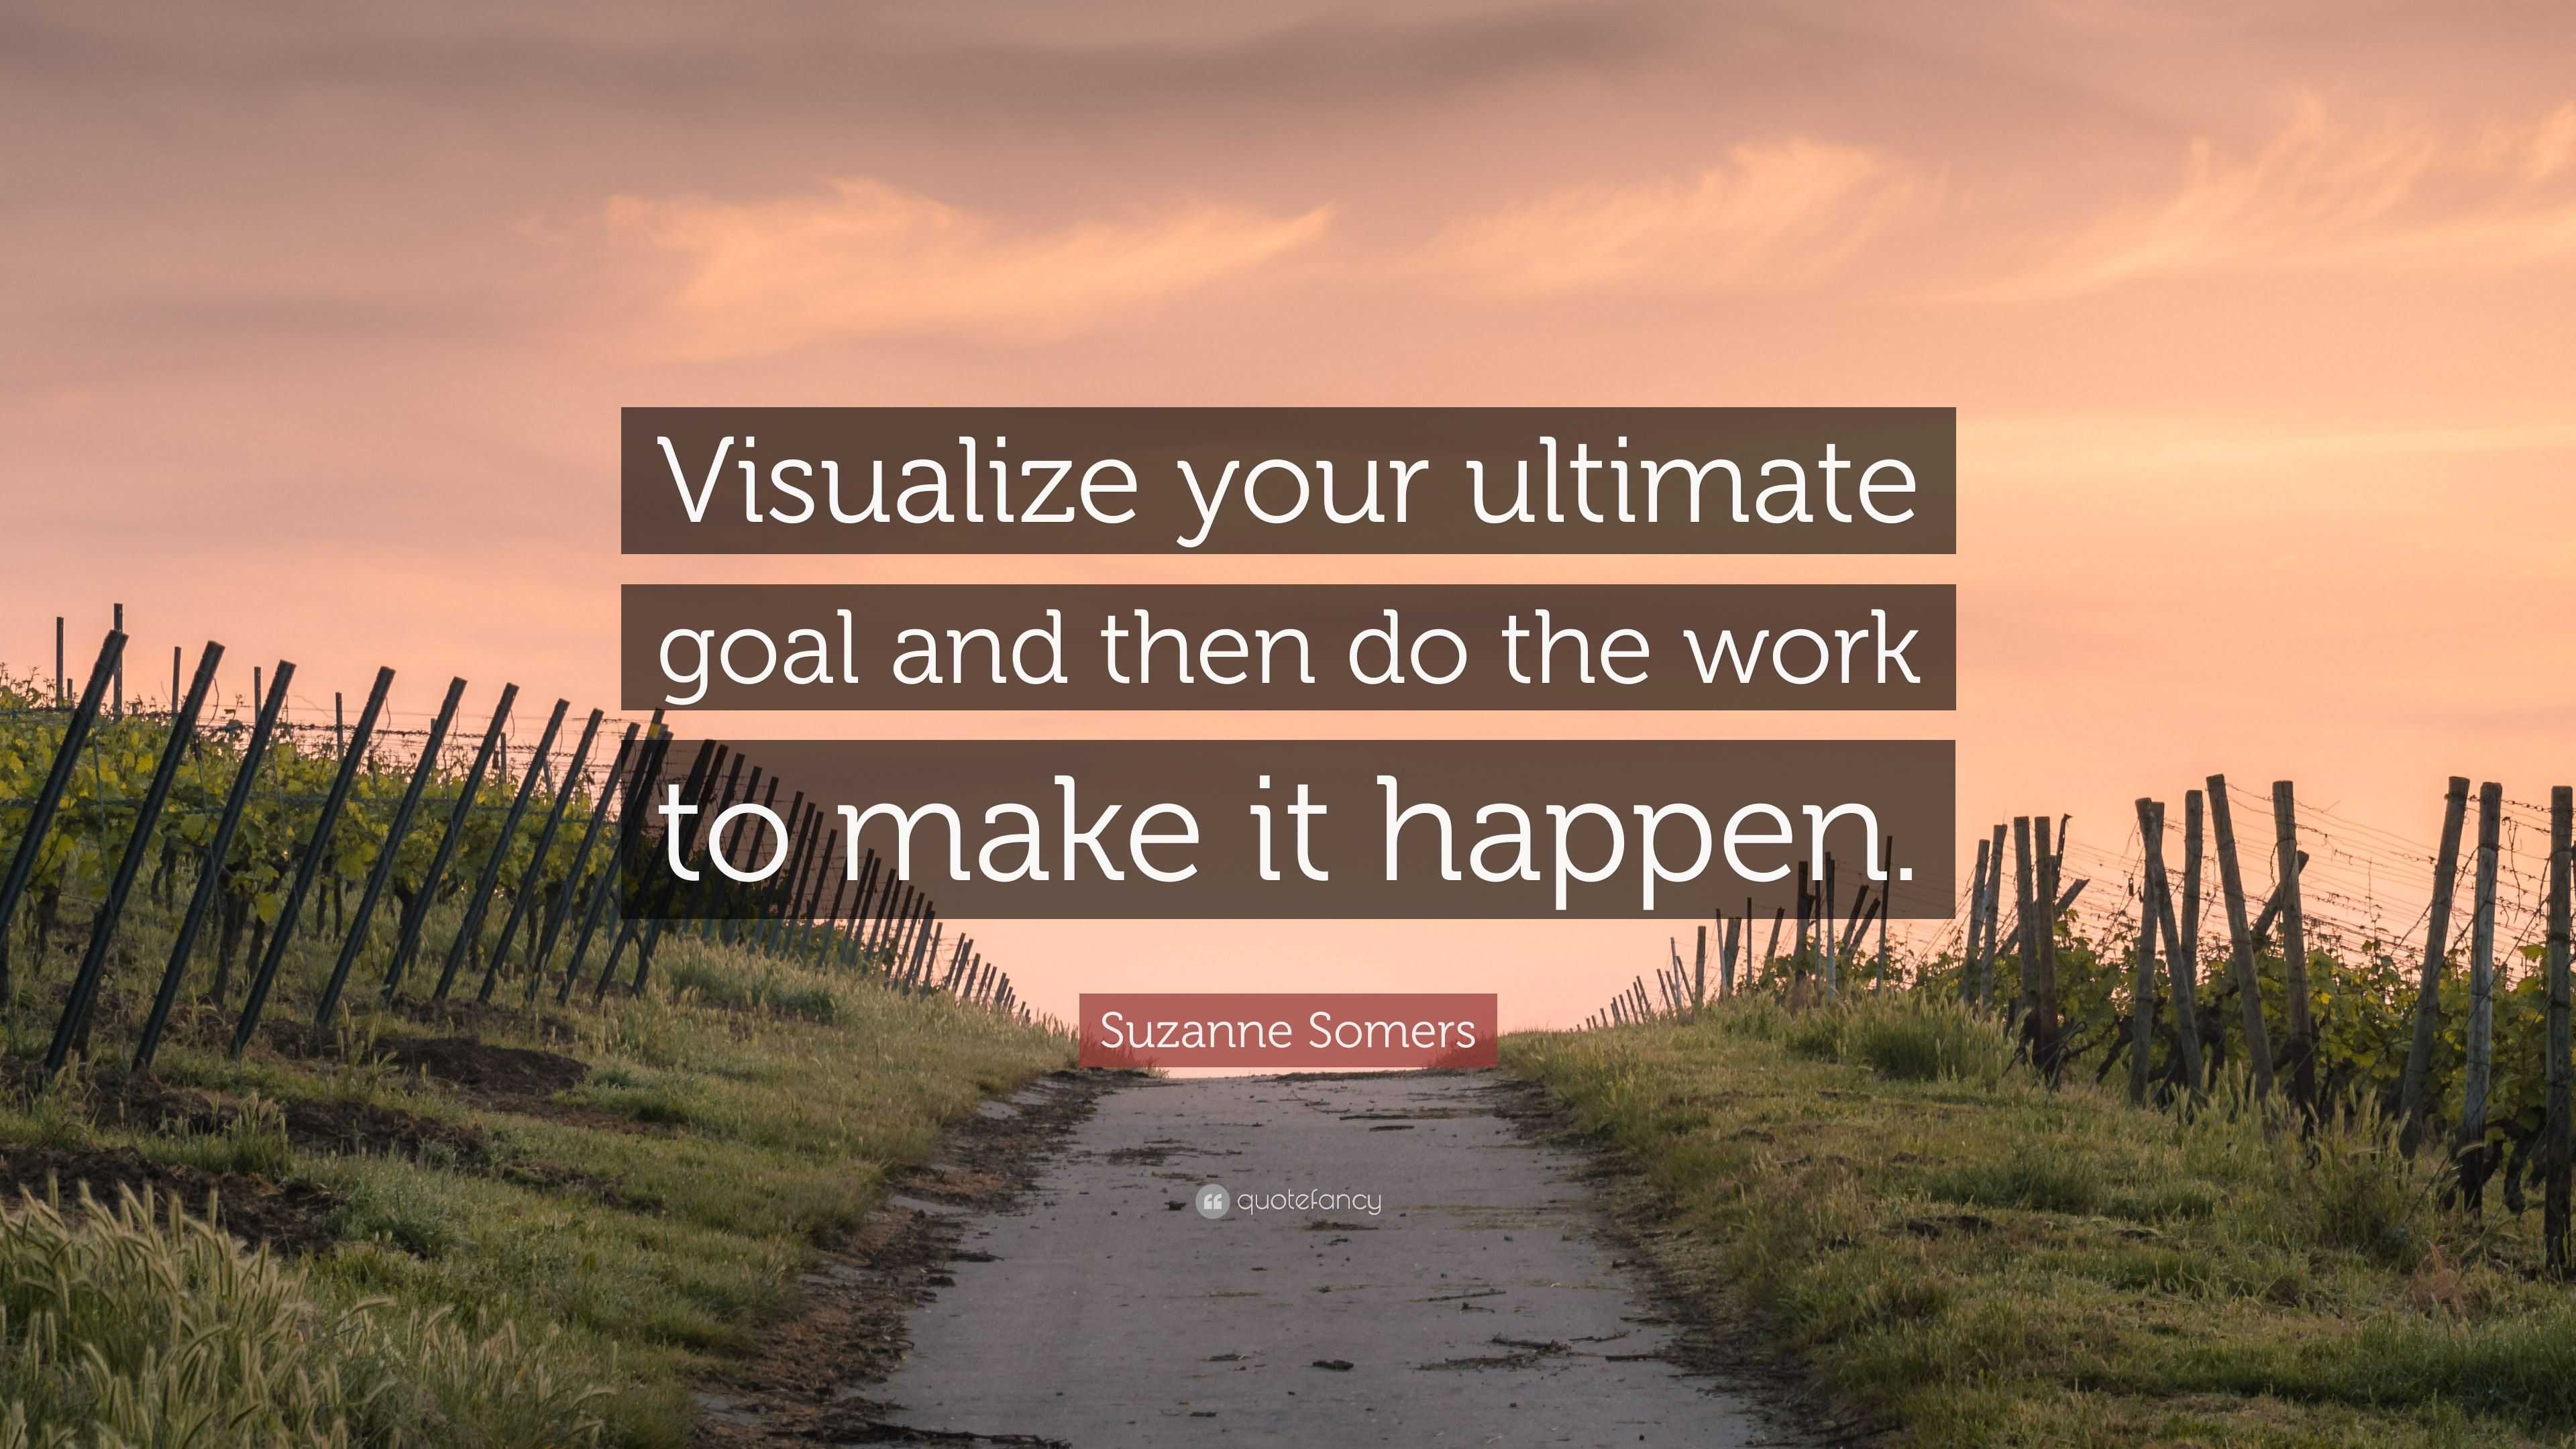 to obtain a goal one must constantly visualize it